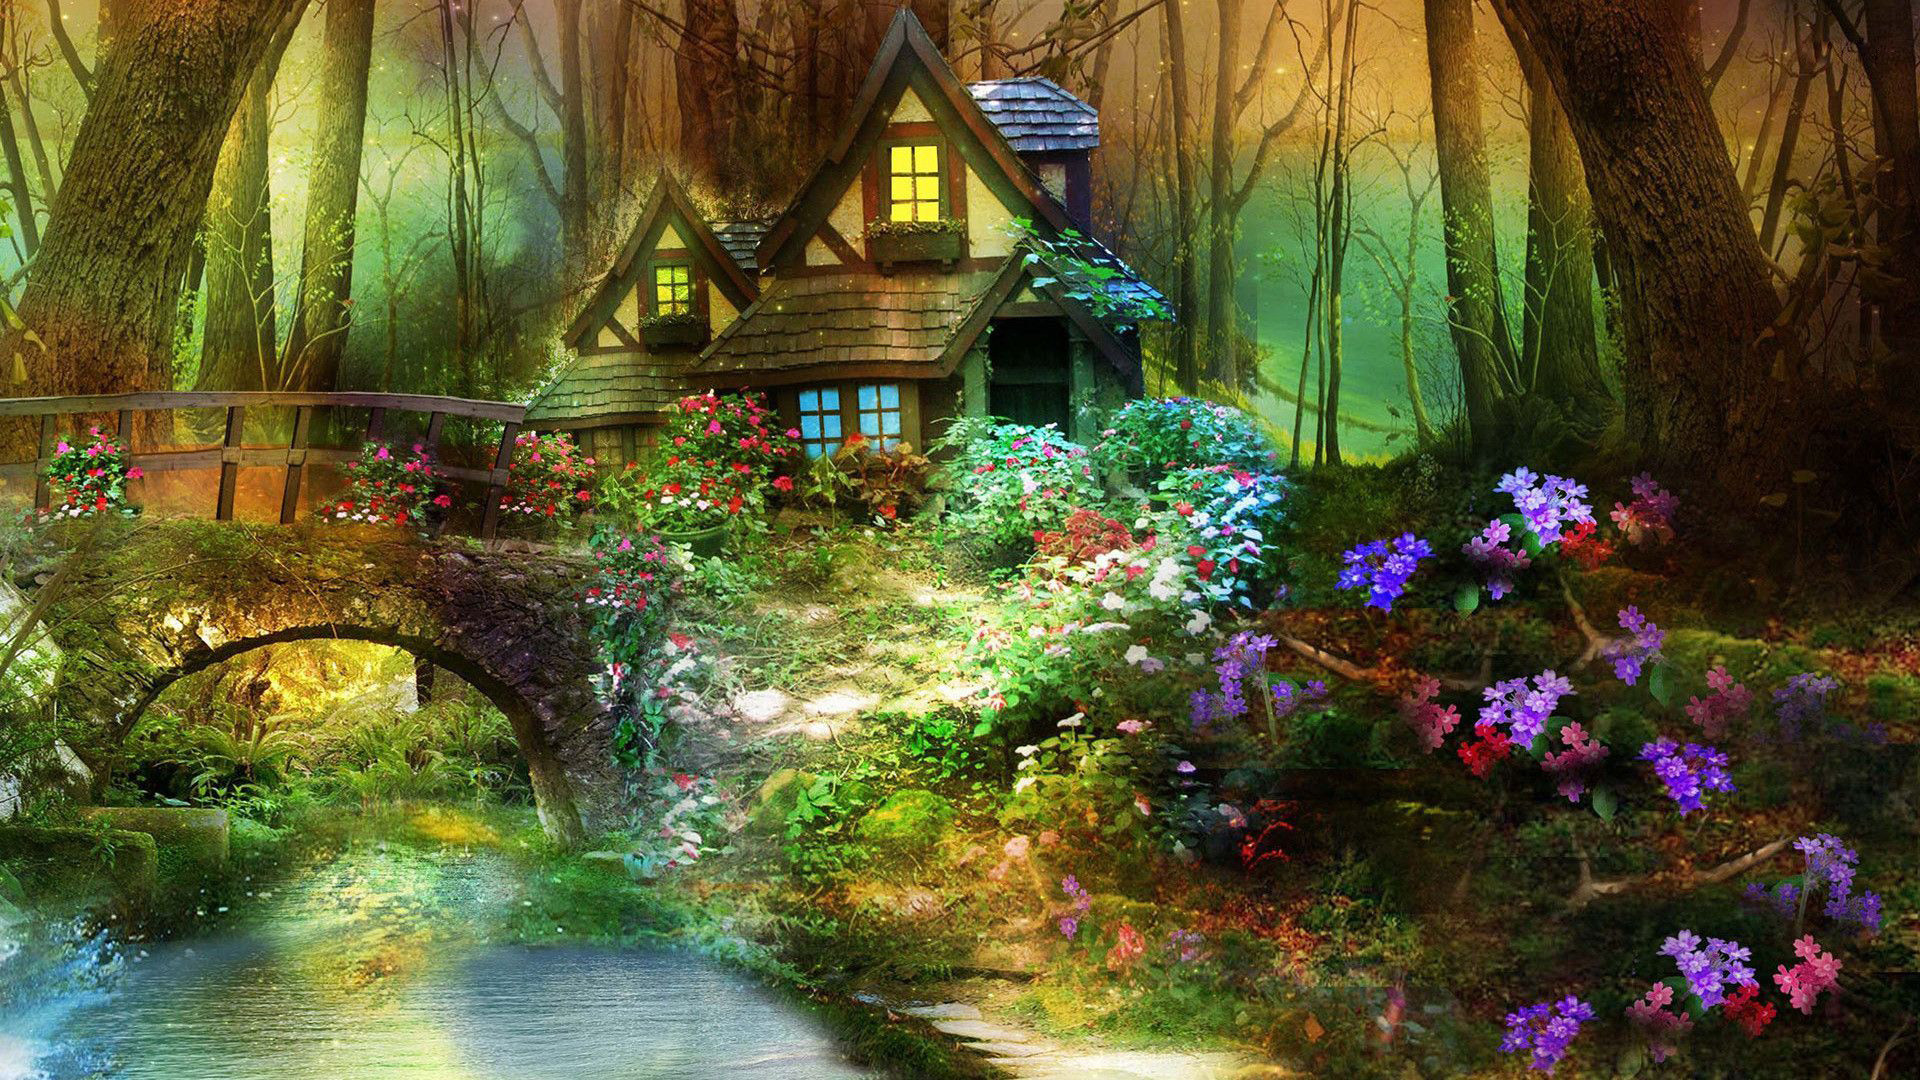 1920x1080 Download Enchanted Forest Pictures.